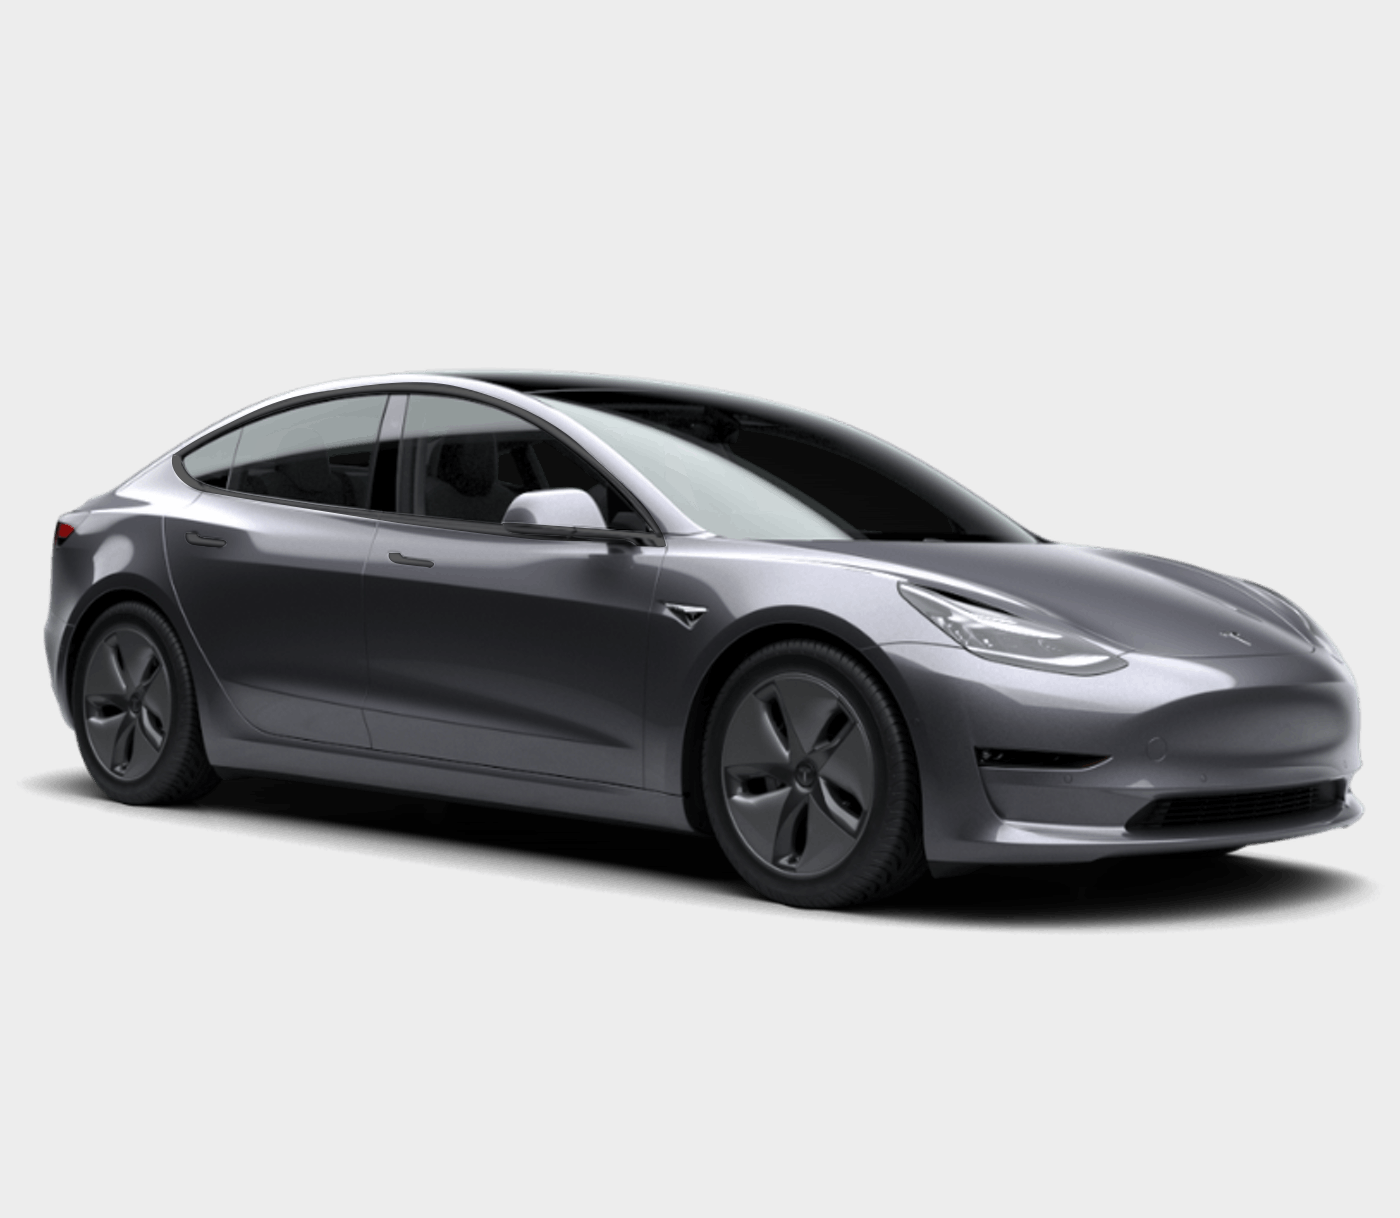 Our alternative to renting the Tesla Model 3LR (Long Range) is the